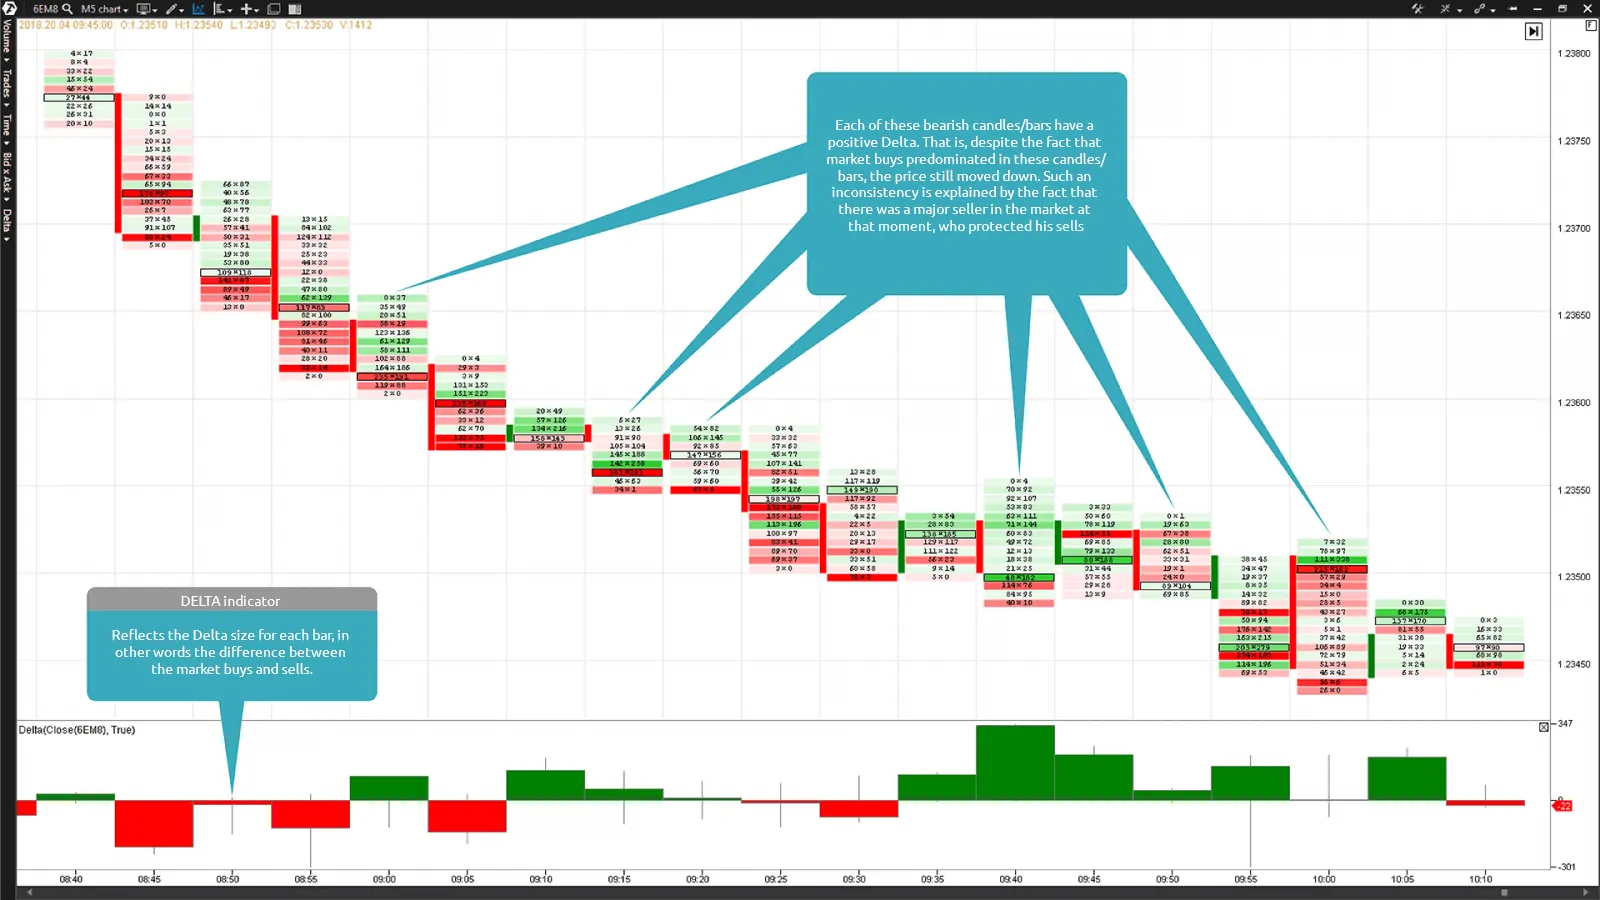 The Bid x Ask Footprint chart and Delta indicator in the lower part of the chart